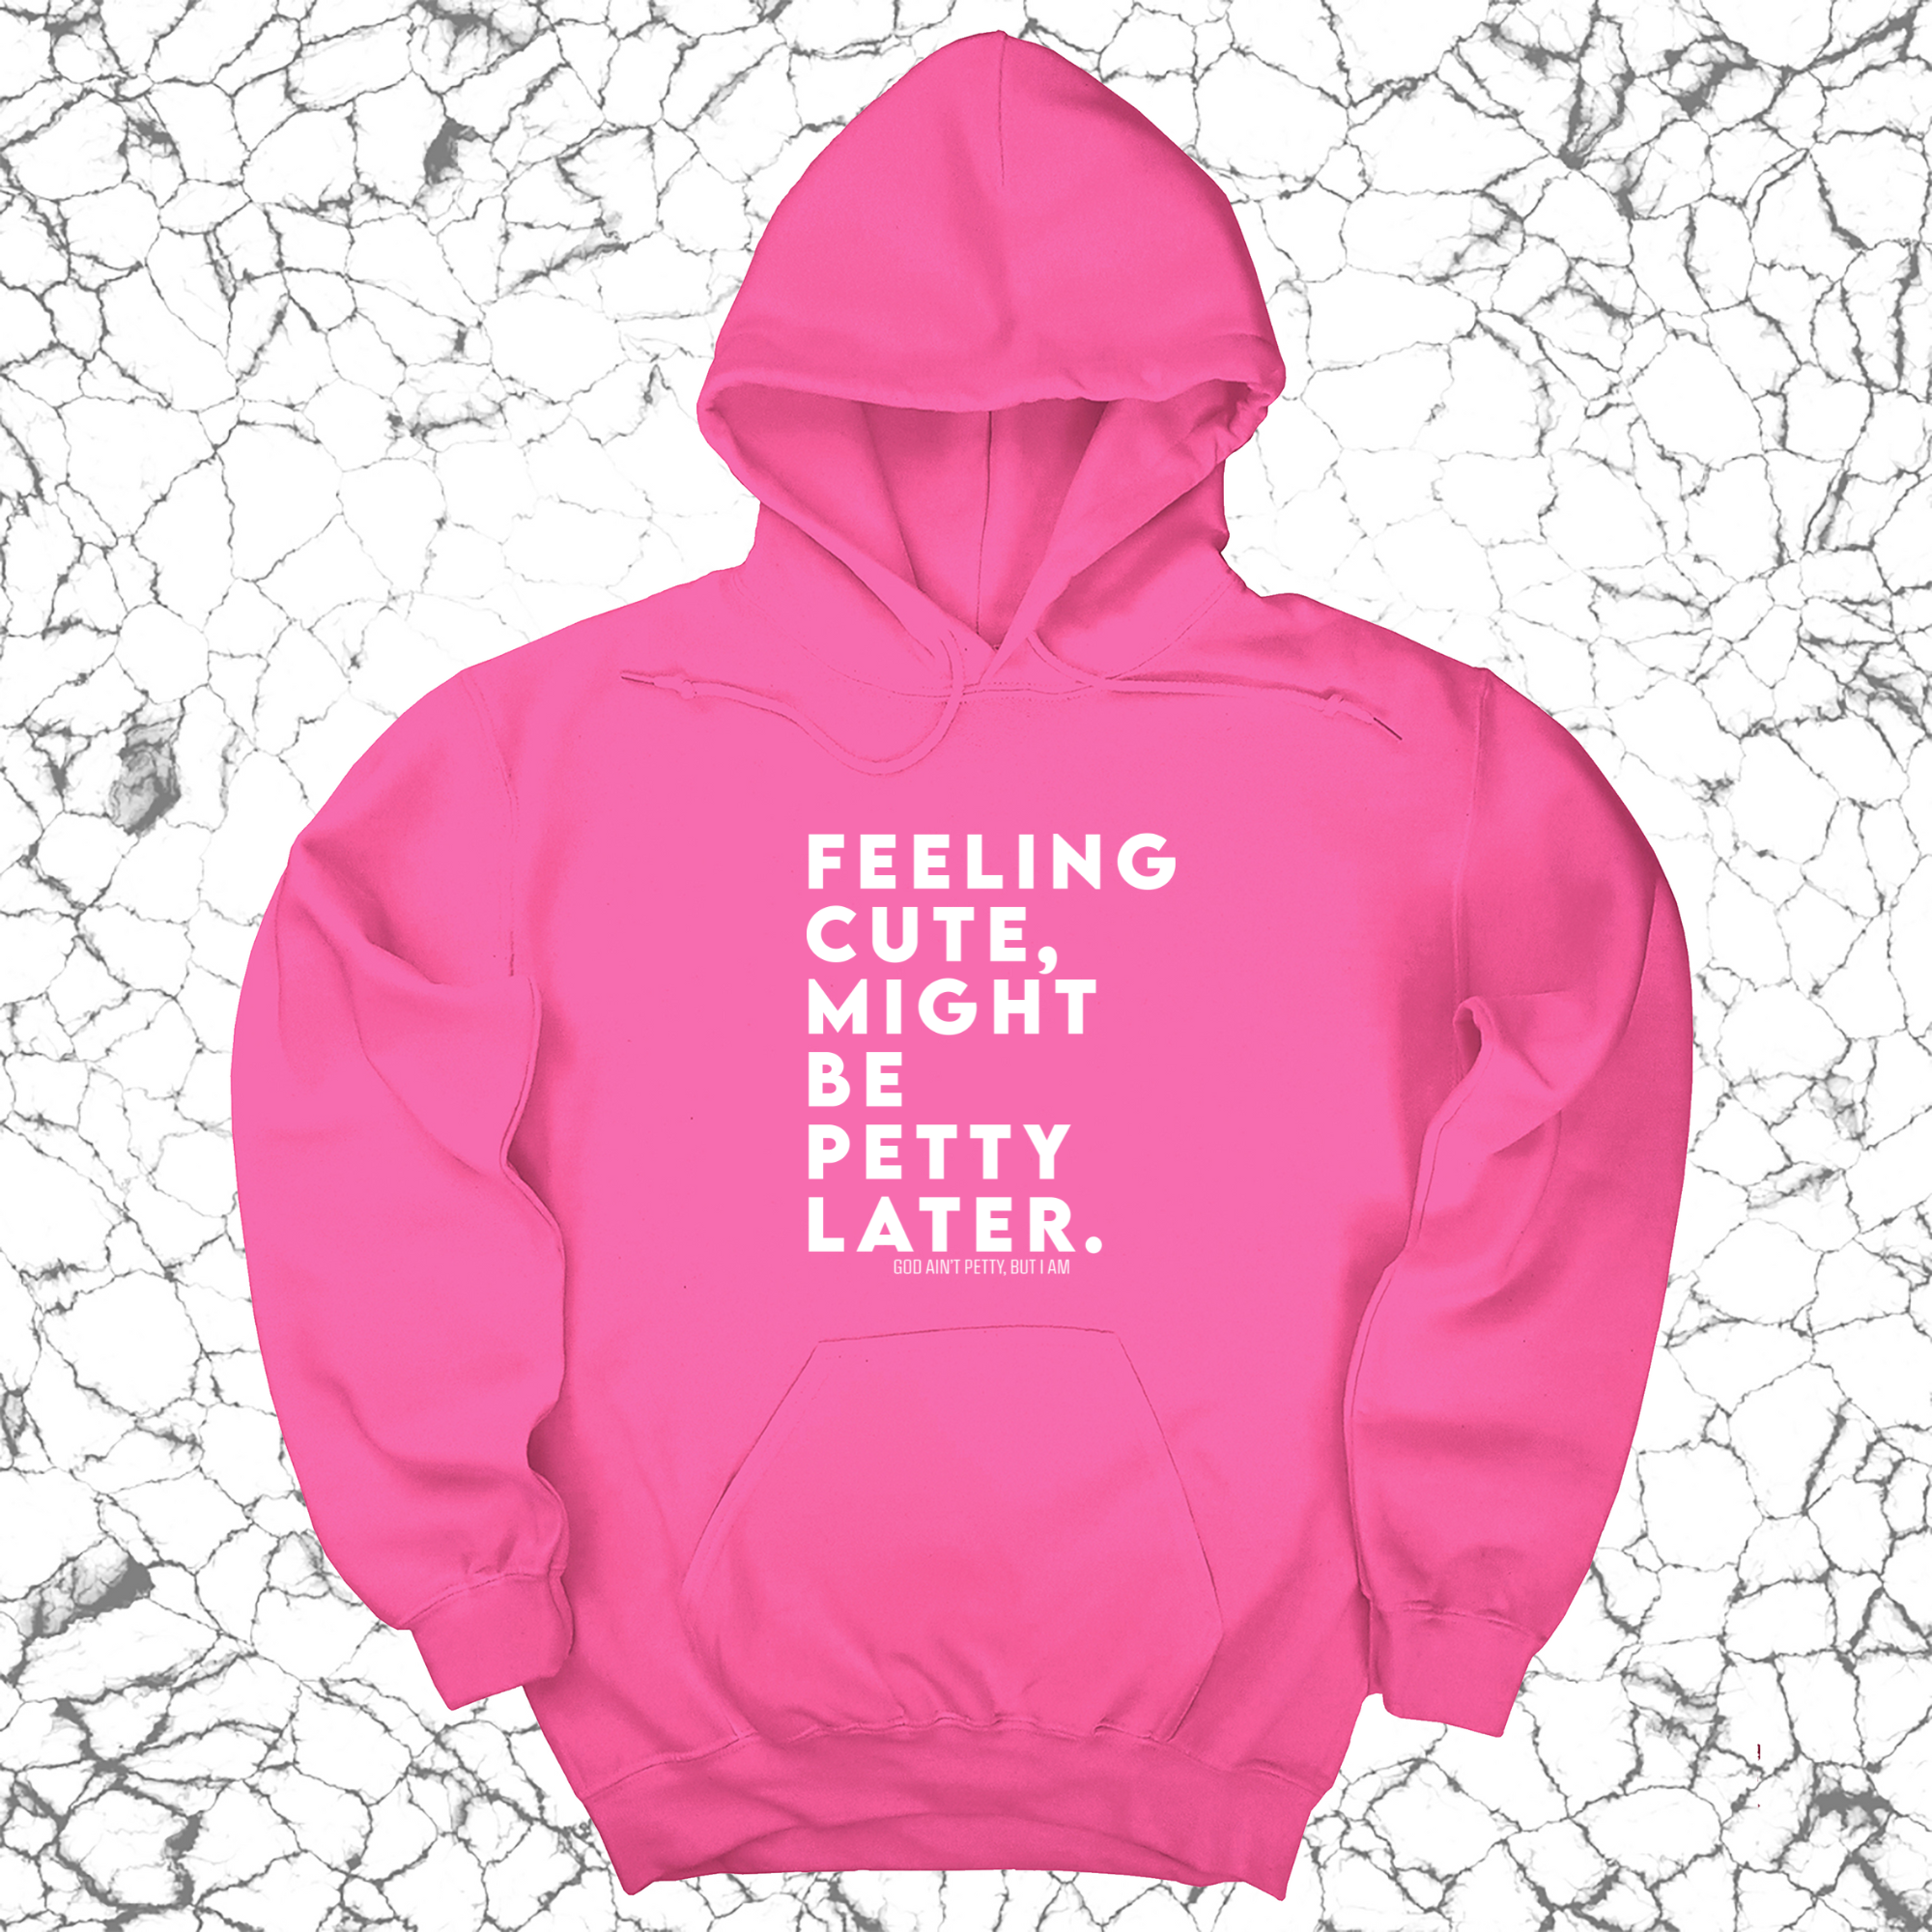 Feeling cute, might be petty later Unisex Hoodie-Hoodie-The Original God Ain't Petty But I Am